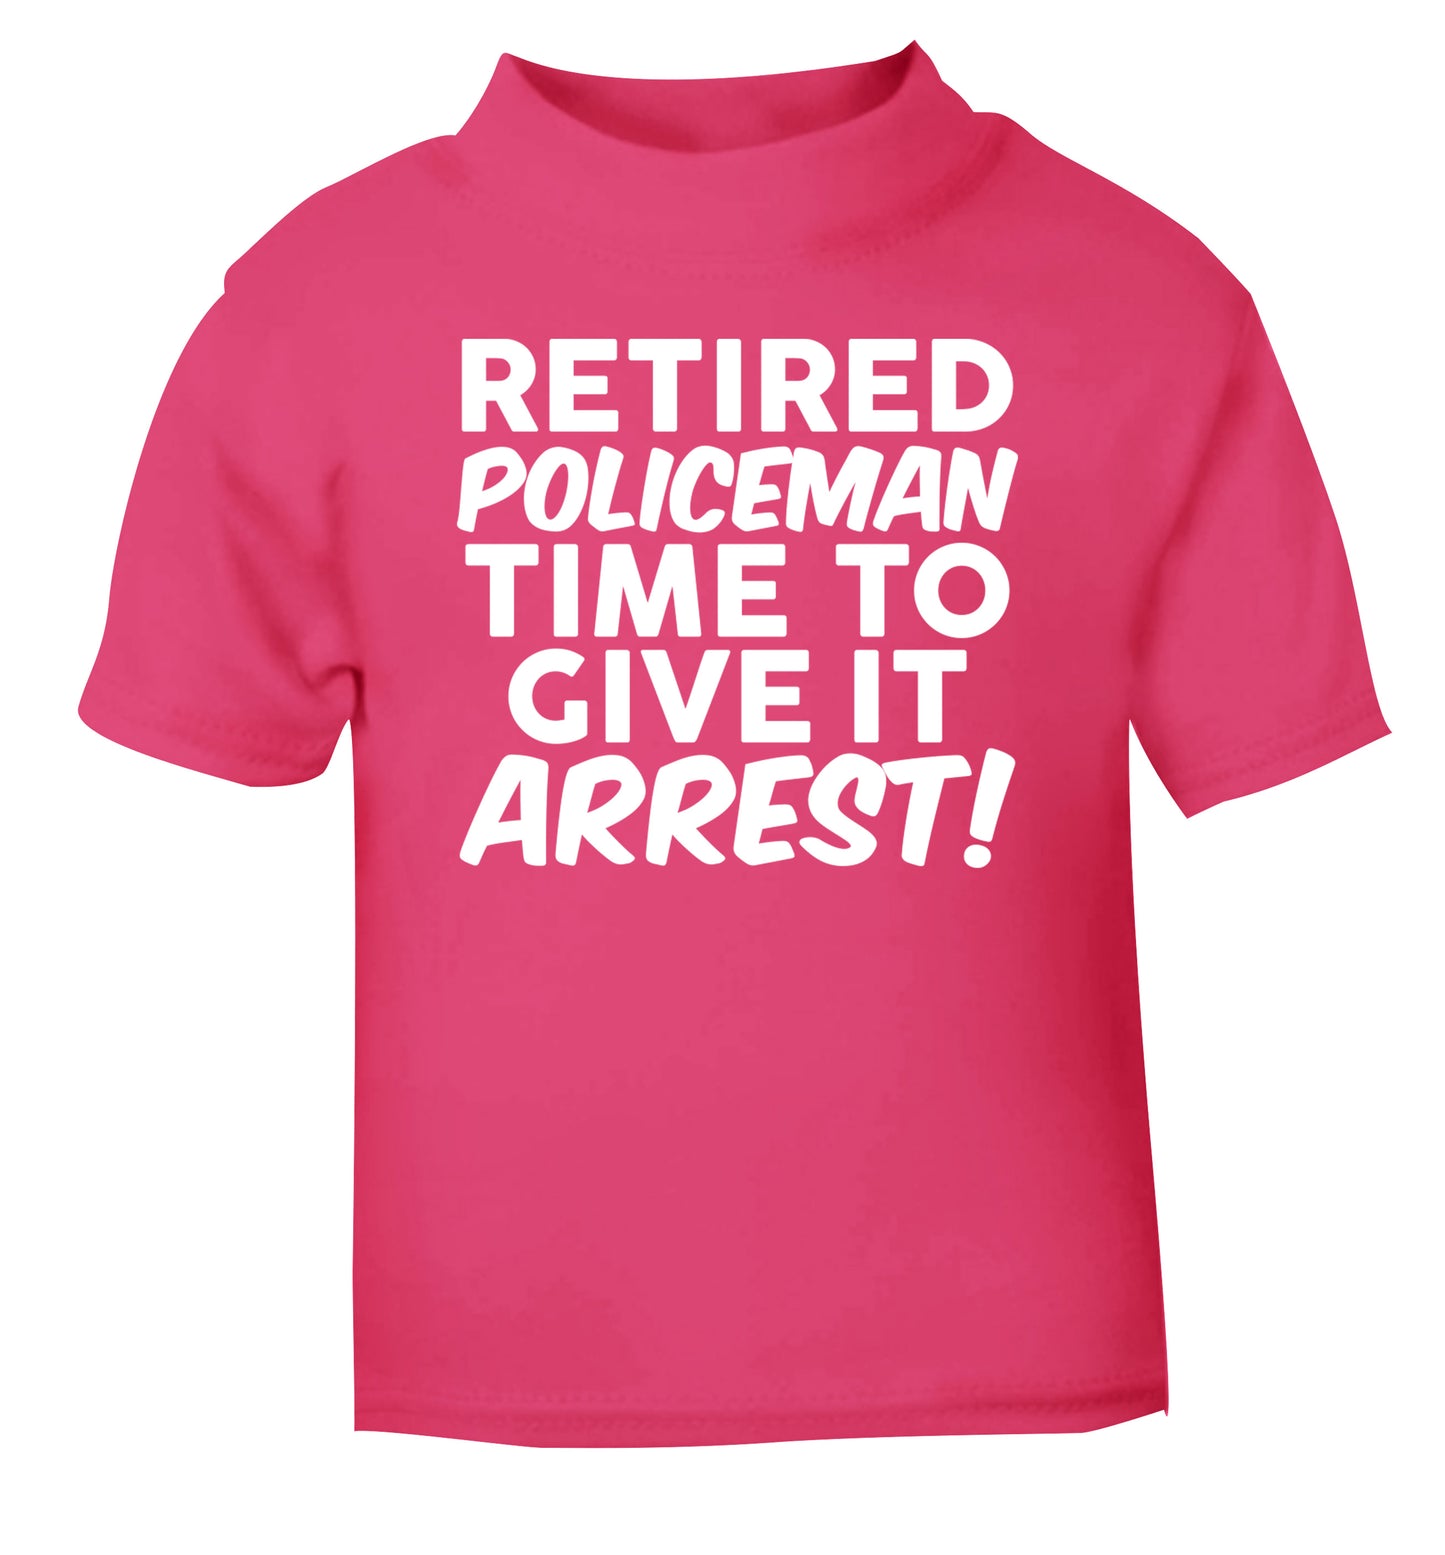 Retired policeman give it arresst! pink Baby Toddler Tshirt 2 Years